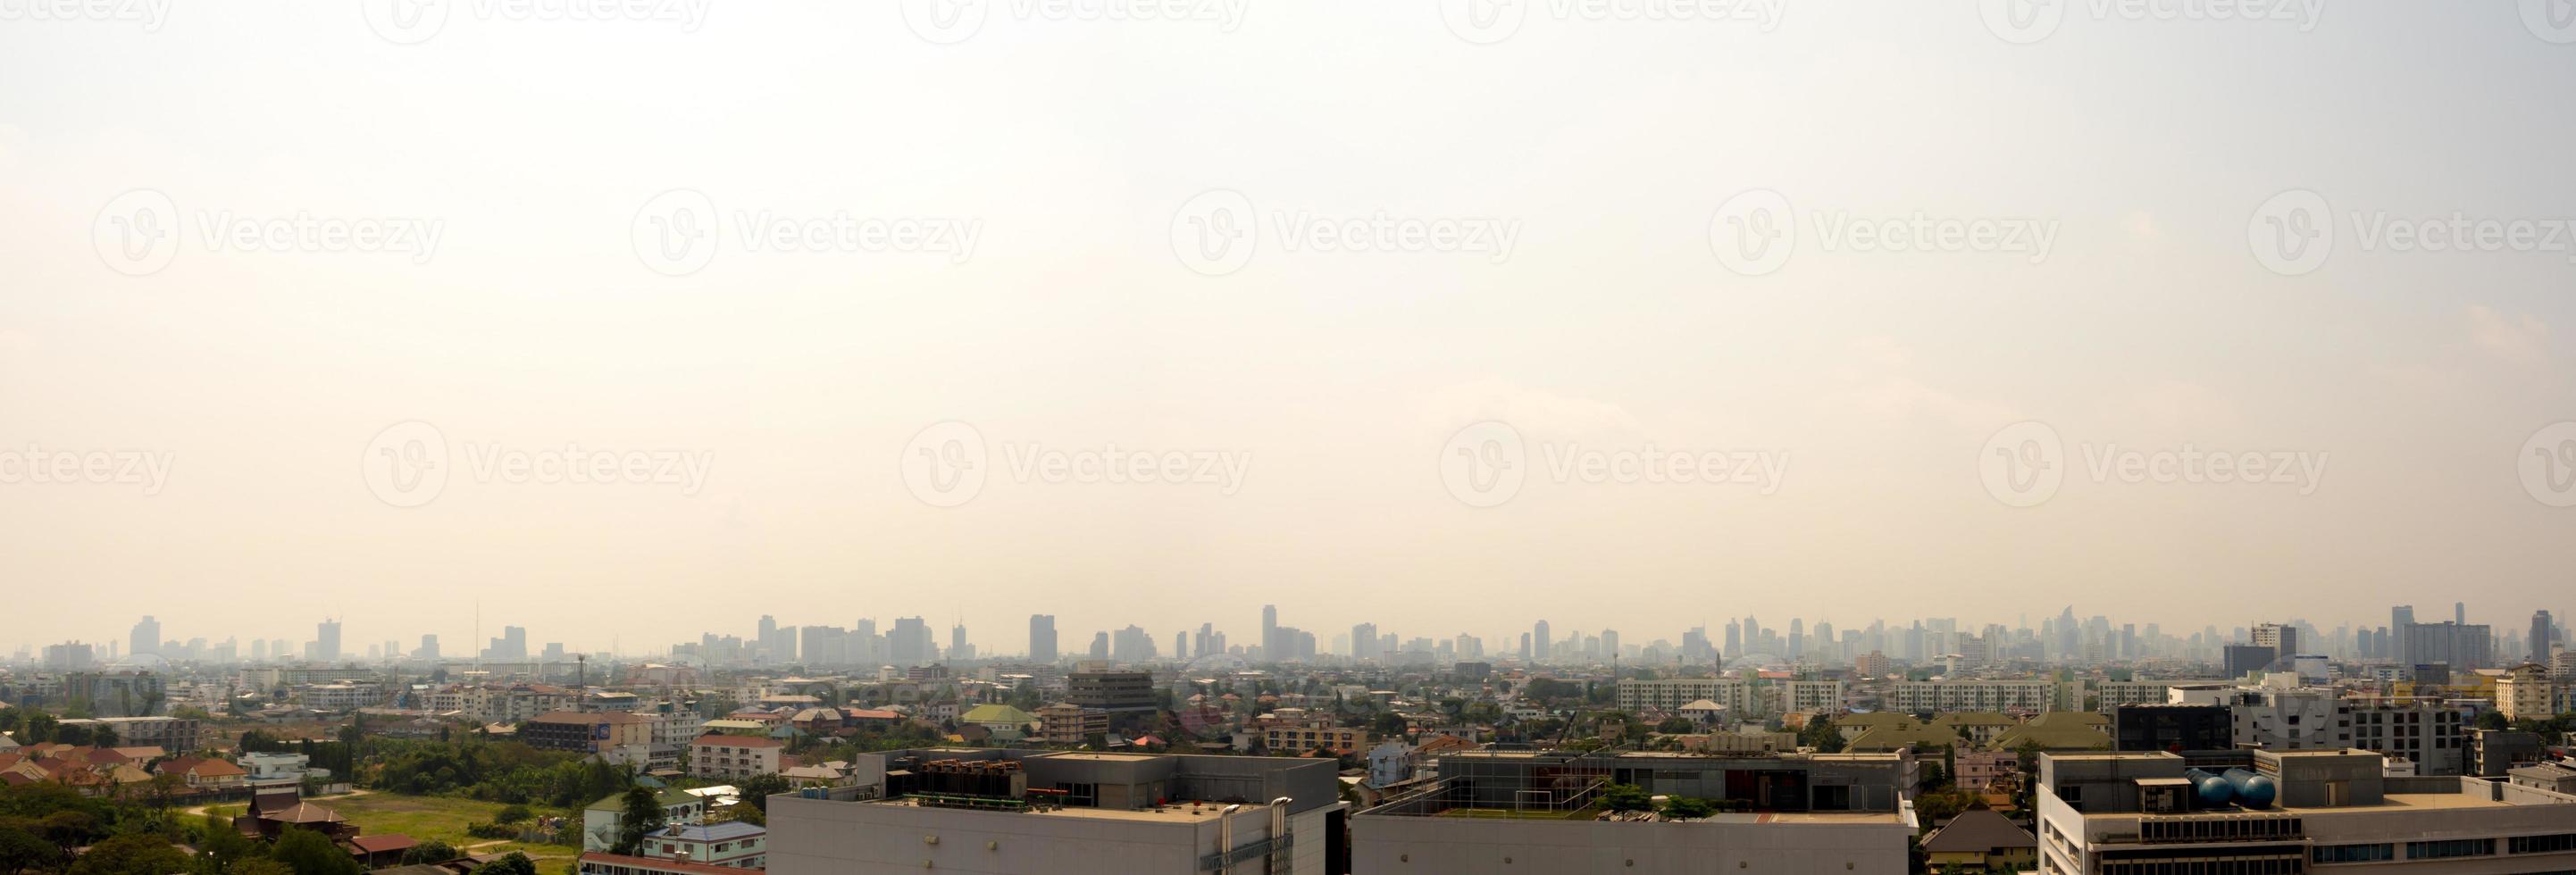 Cityscape urban skyline in the mist or smog. Wide and High view image of Bangkok city in the smog photo